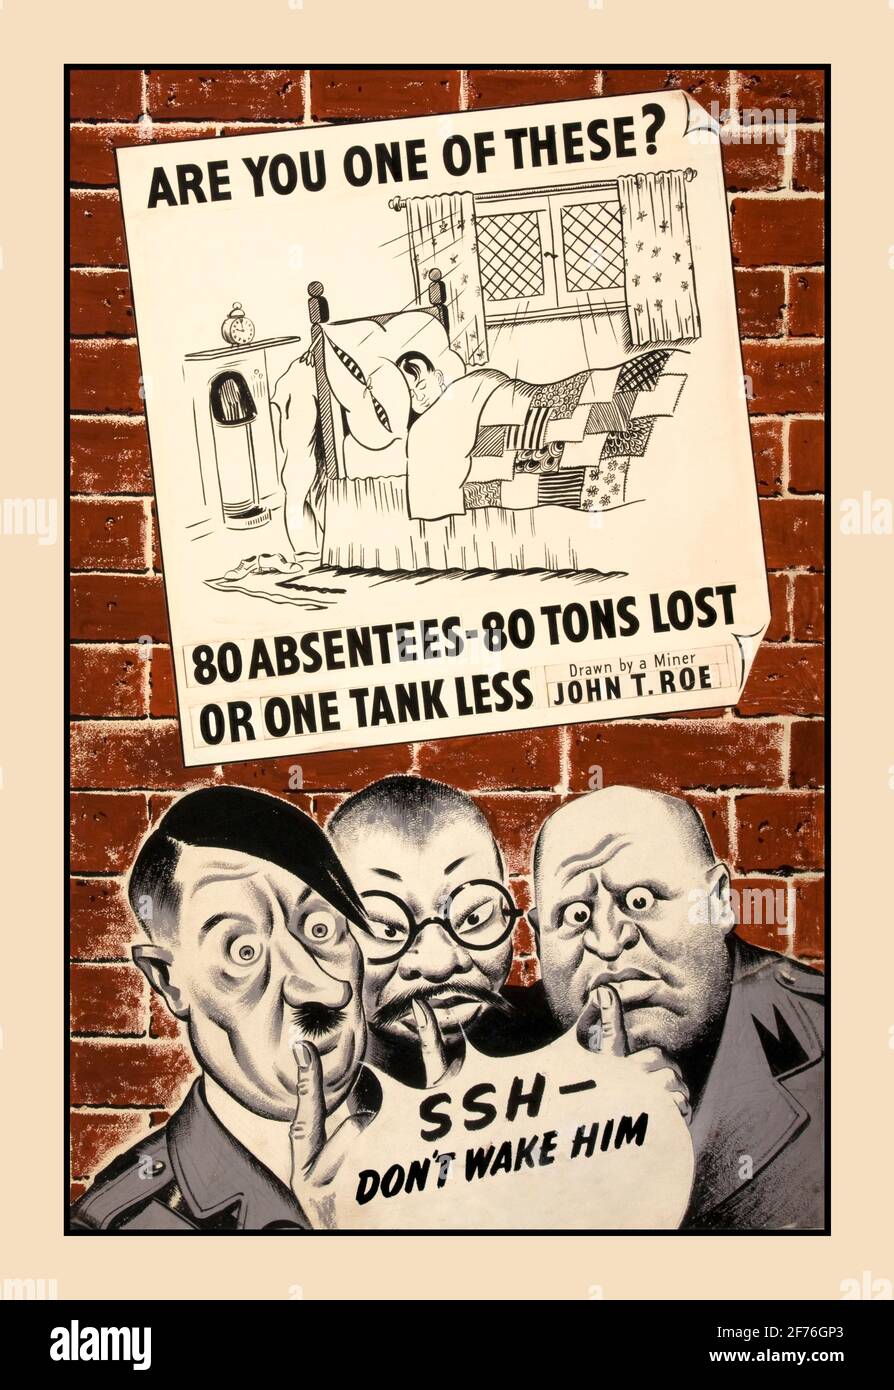 WW2 UK Propaganda poster 'Are you one of these? 80 Absentees - 80 tons lost or one tank less' between 1939 and 1946 WW2 Propaganda Poster for absenteeism UK war production with Hitler Tojo and Mussolini cartoons ArtistJohn T Roe World War II Stock Photo